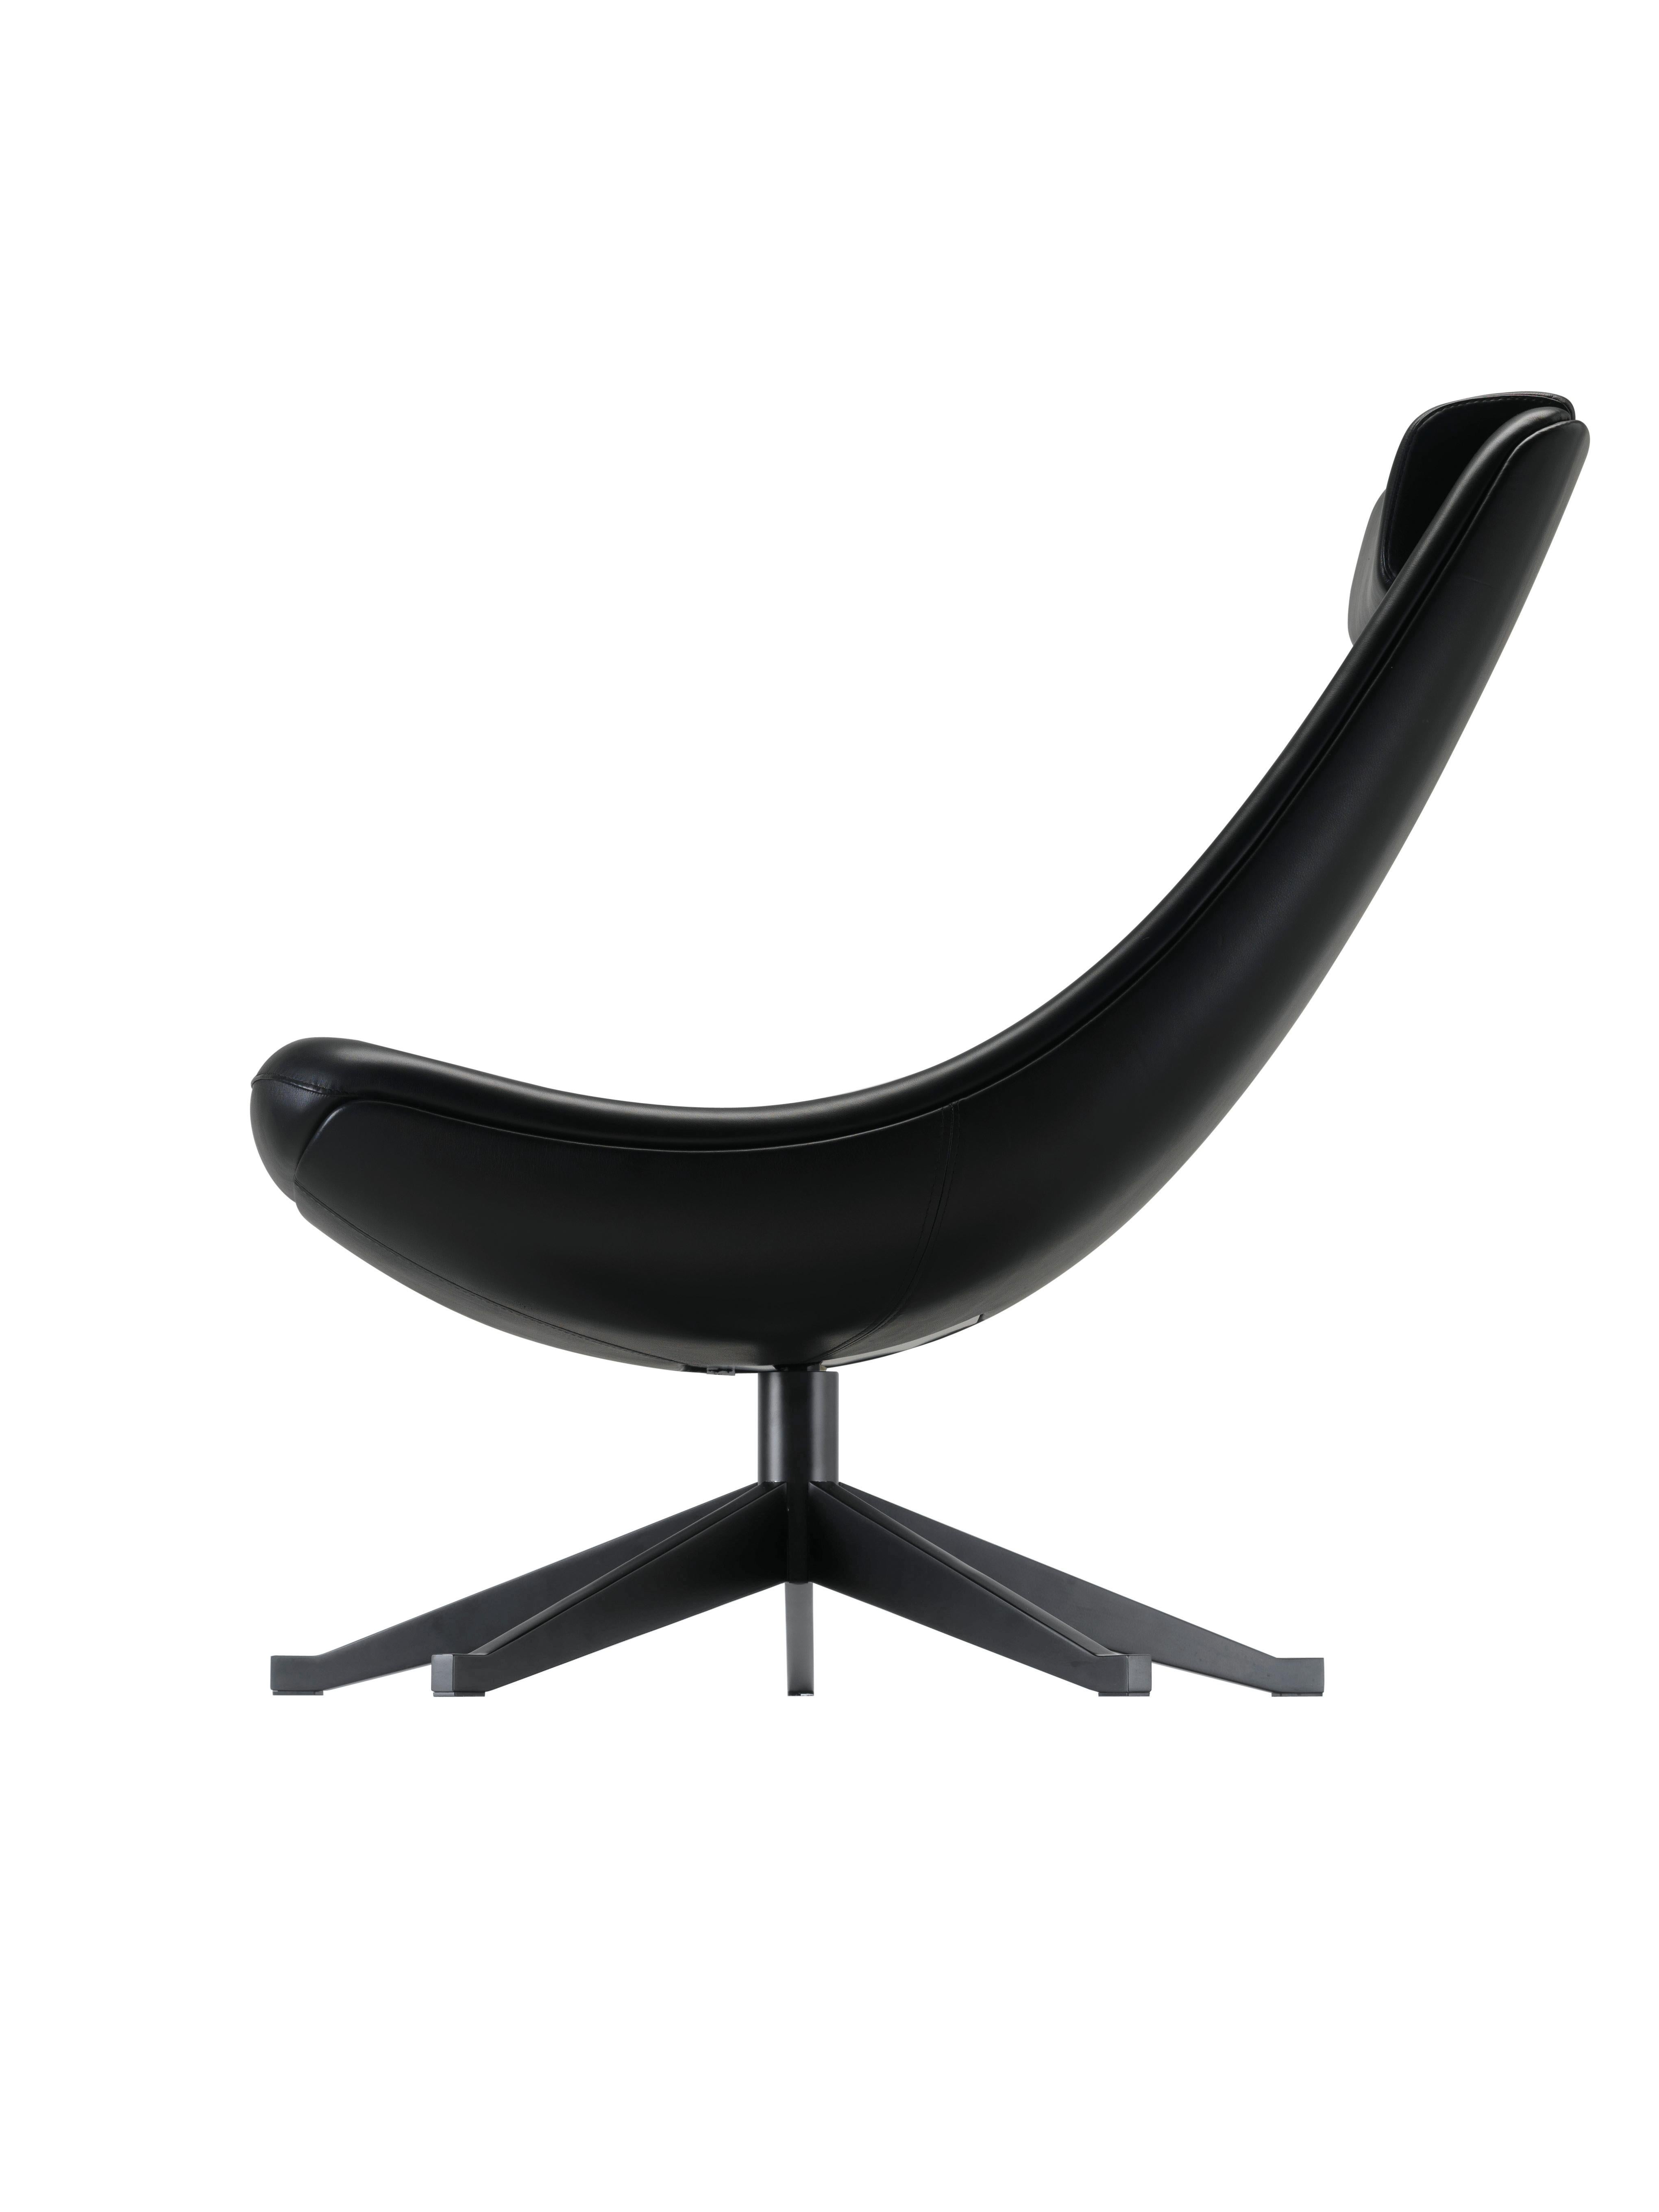 Alias 090 Manzù Lounge Chair in Black Leather Seat with Lacquered Aluminum Frame by Pio Manzù

Armchair with seat and back shell in compact polyurethane moulded together with expanded polyurethane, 5-star base in black (A009) lacquered die-cast